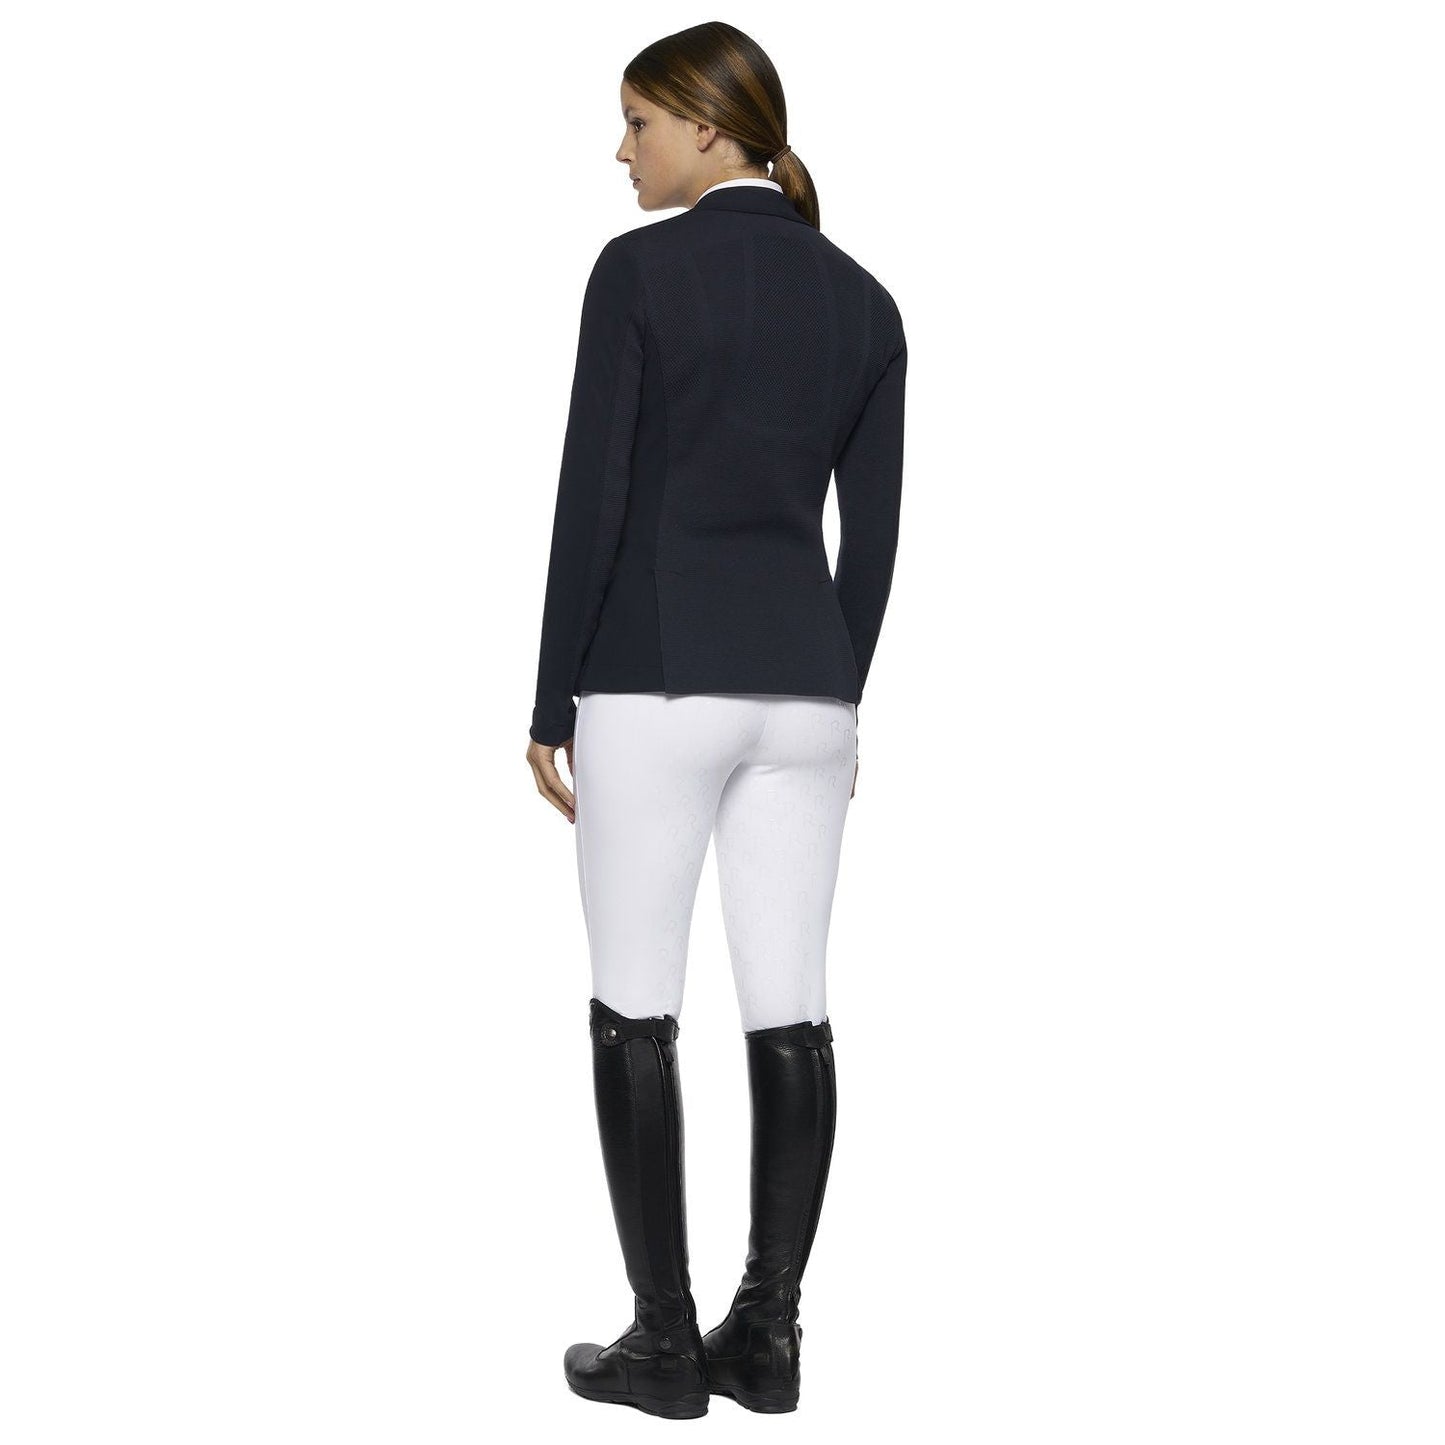 Cavalleria Toscana Light Tech Knit Zip Riding Jacket-Trailrace Equestrian Outfitters-The Equestrian